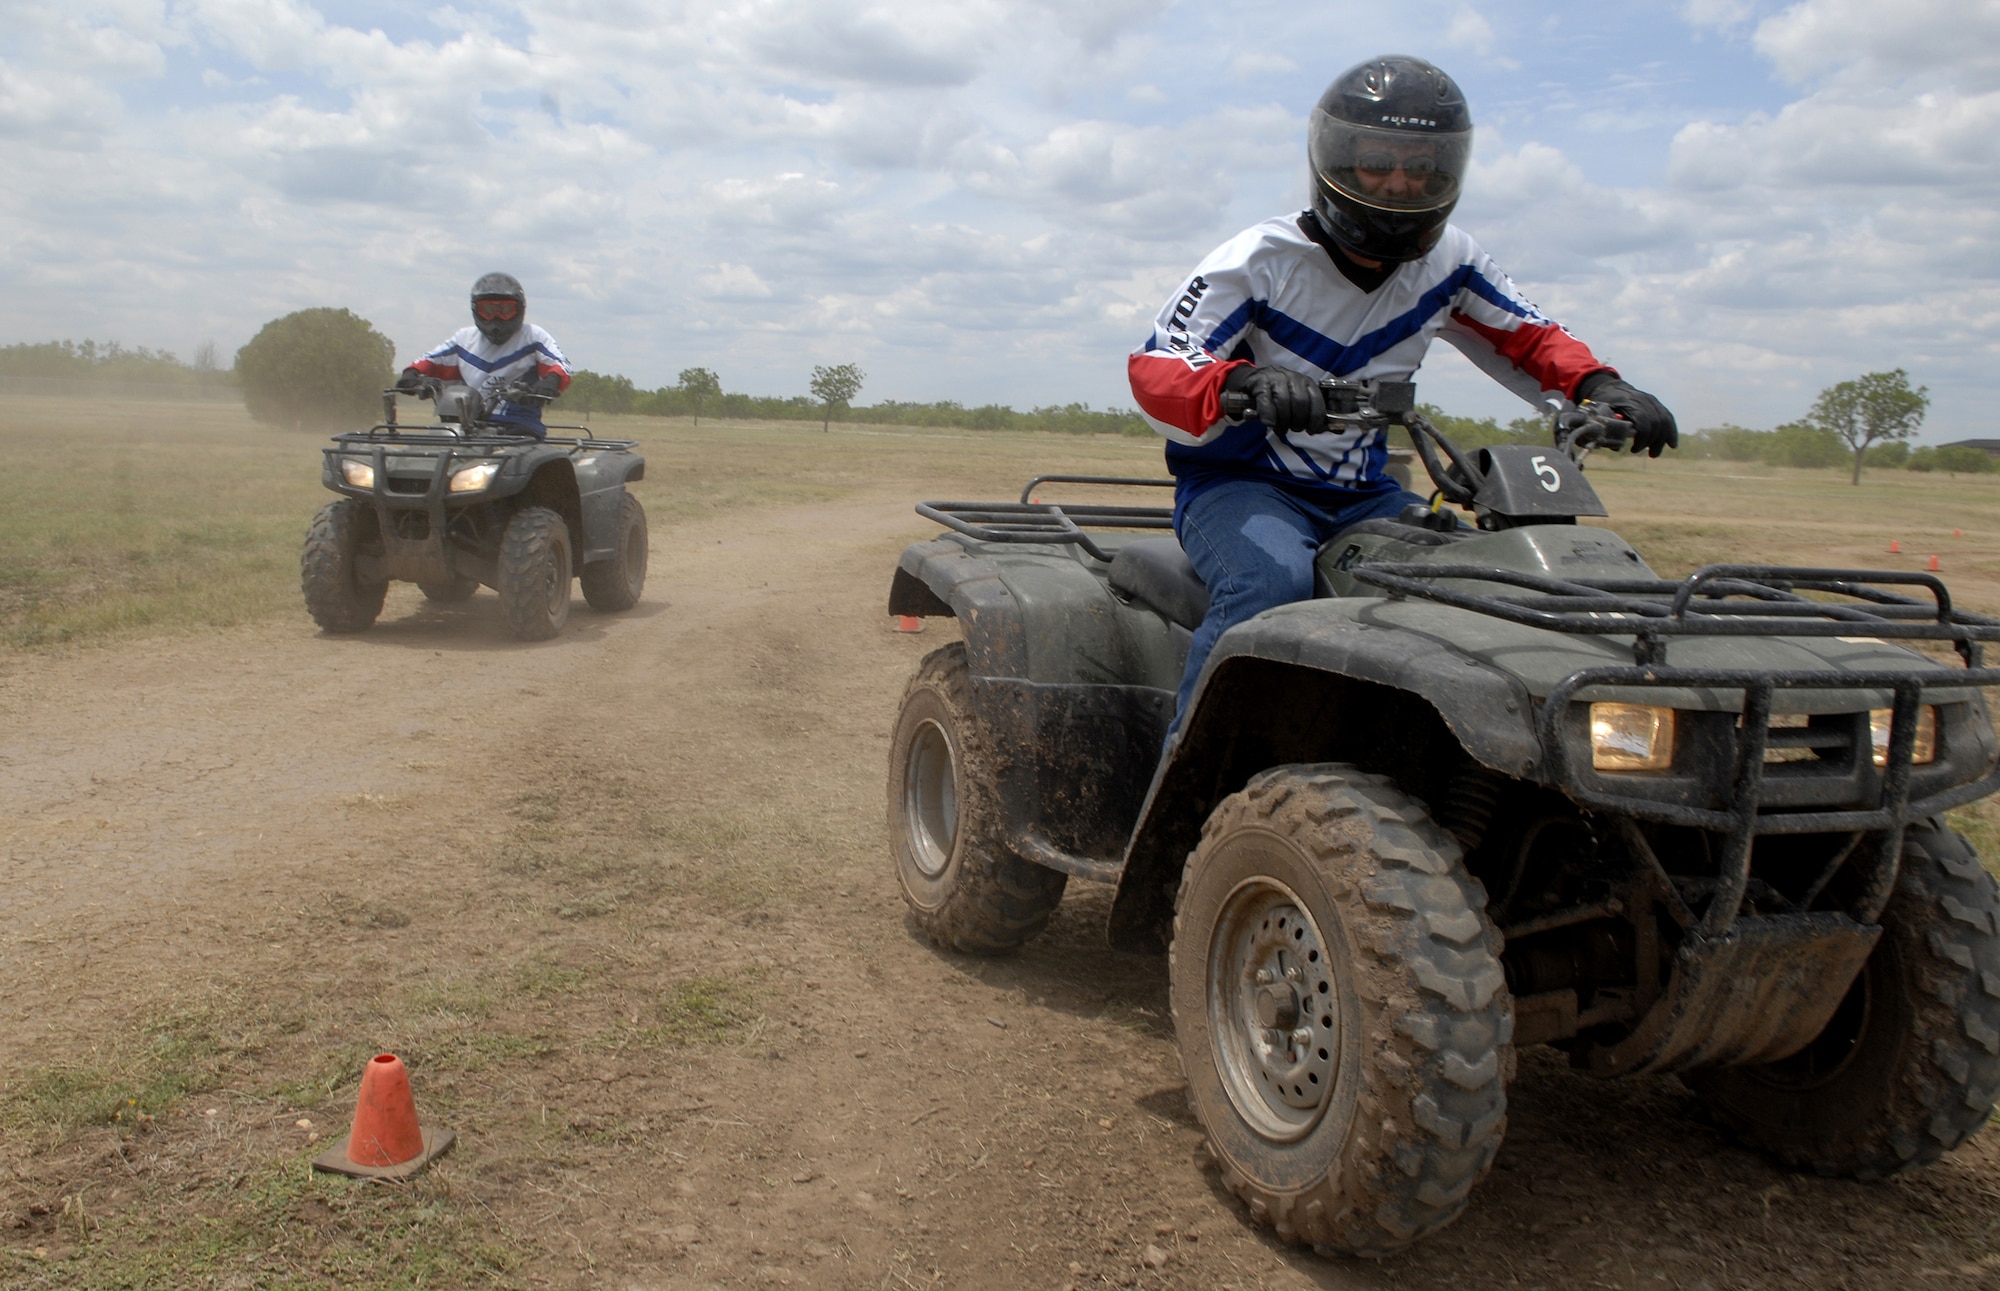 Staff Sgt Robert Carpenter (front), 97th Security Forces Squadron, Altus Air Force Base, Okla., and Staff Sgt Kevin Myers (back), 17th Security Forces Squadron, demonstrate safe riding practices by wearing proper safety gear during the ATV Rider Course May 16. (U.S. Air Force photo by Senior Airman Kamaile Chan)